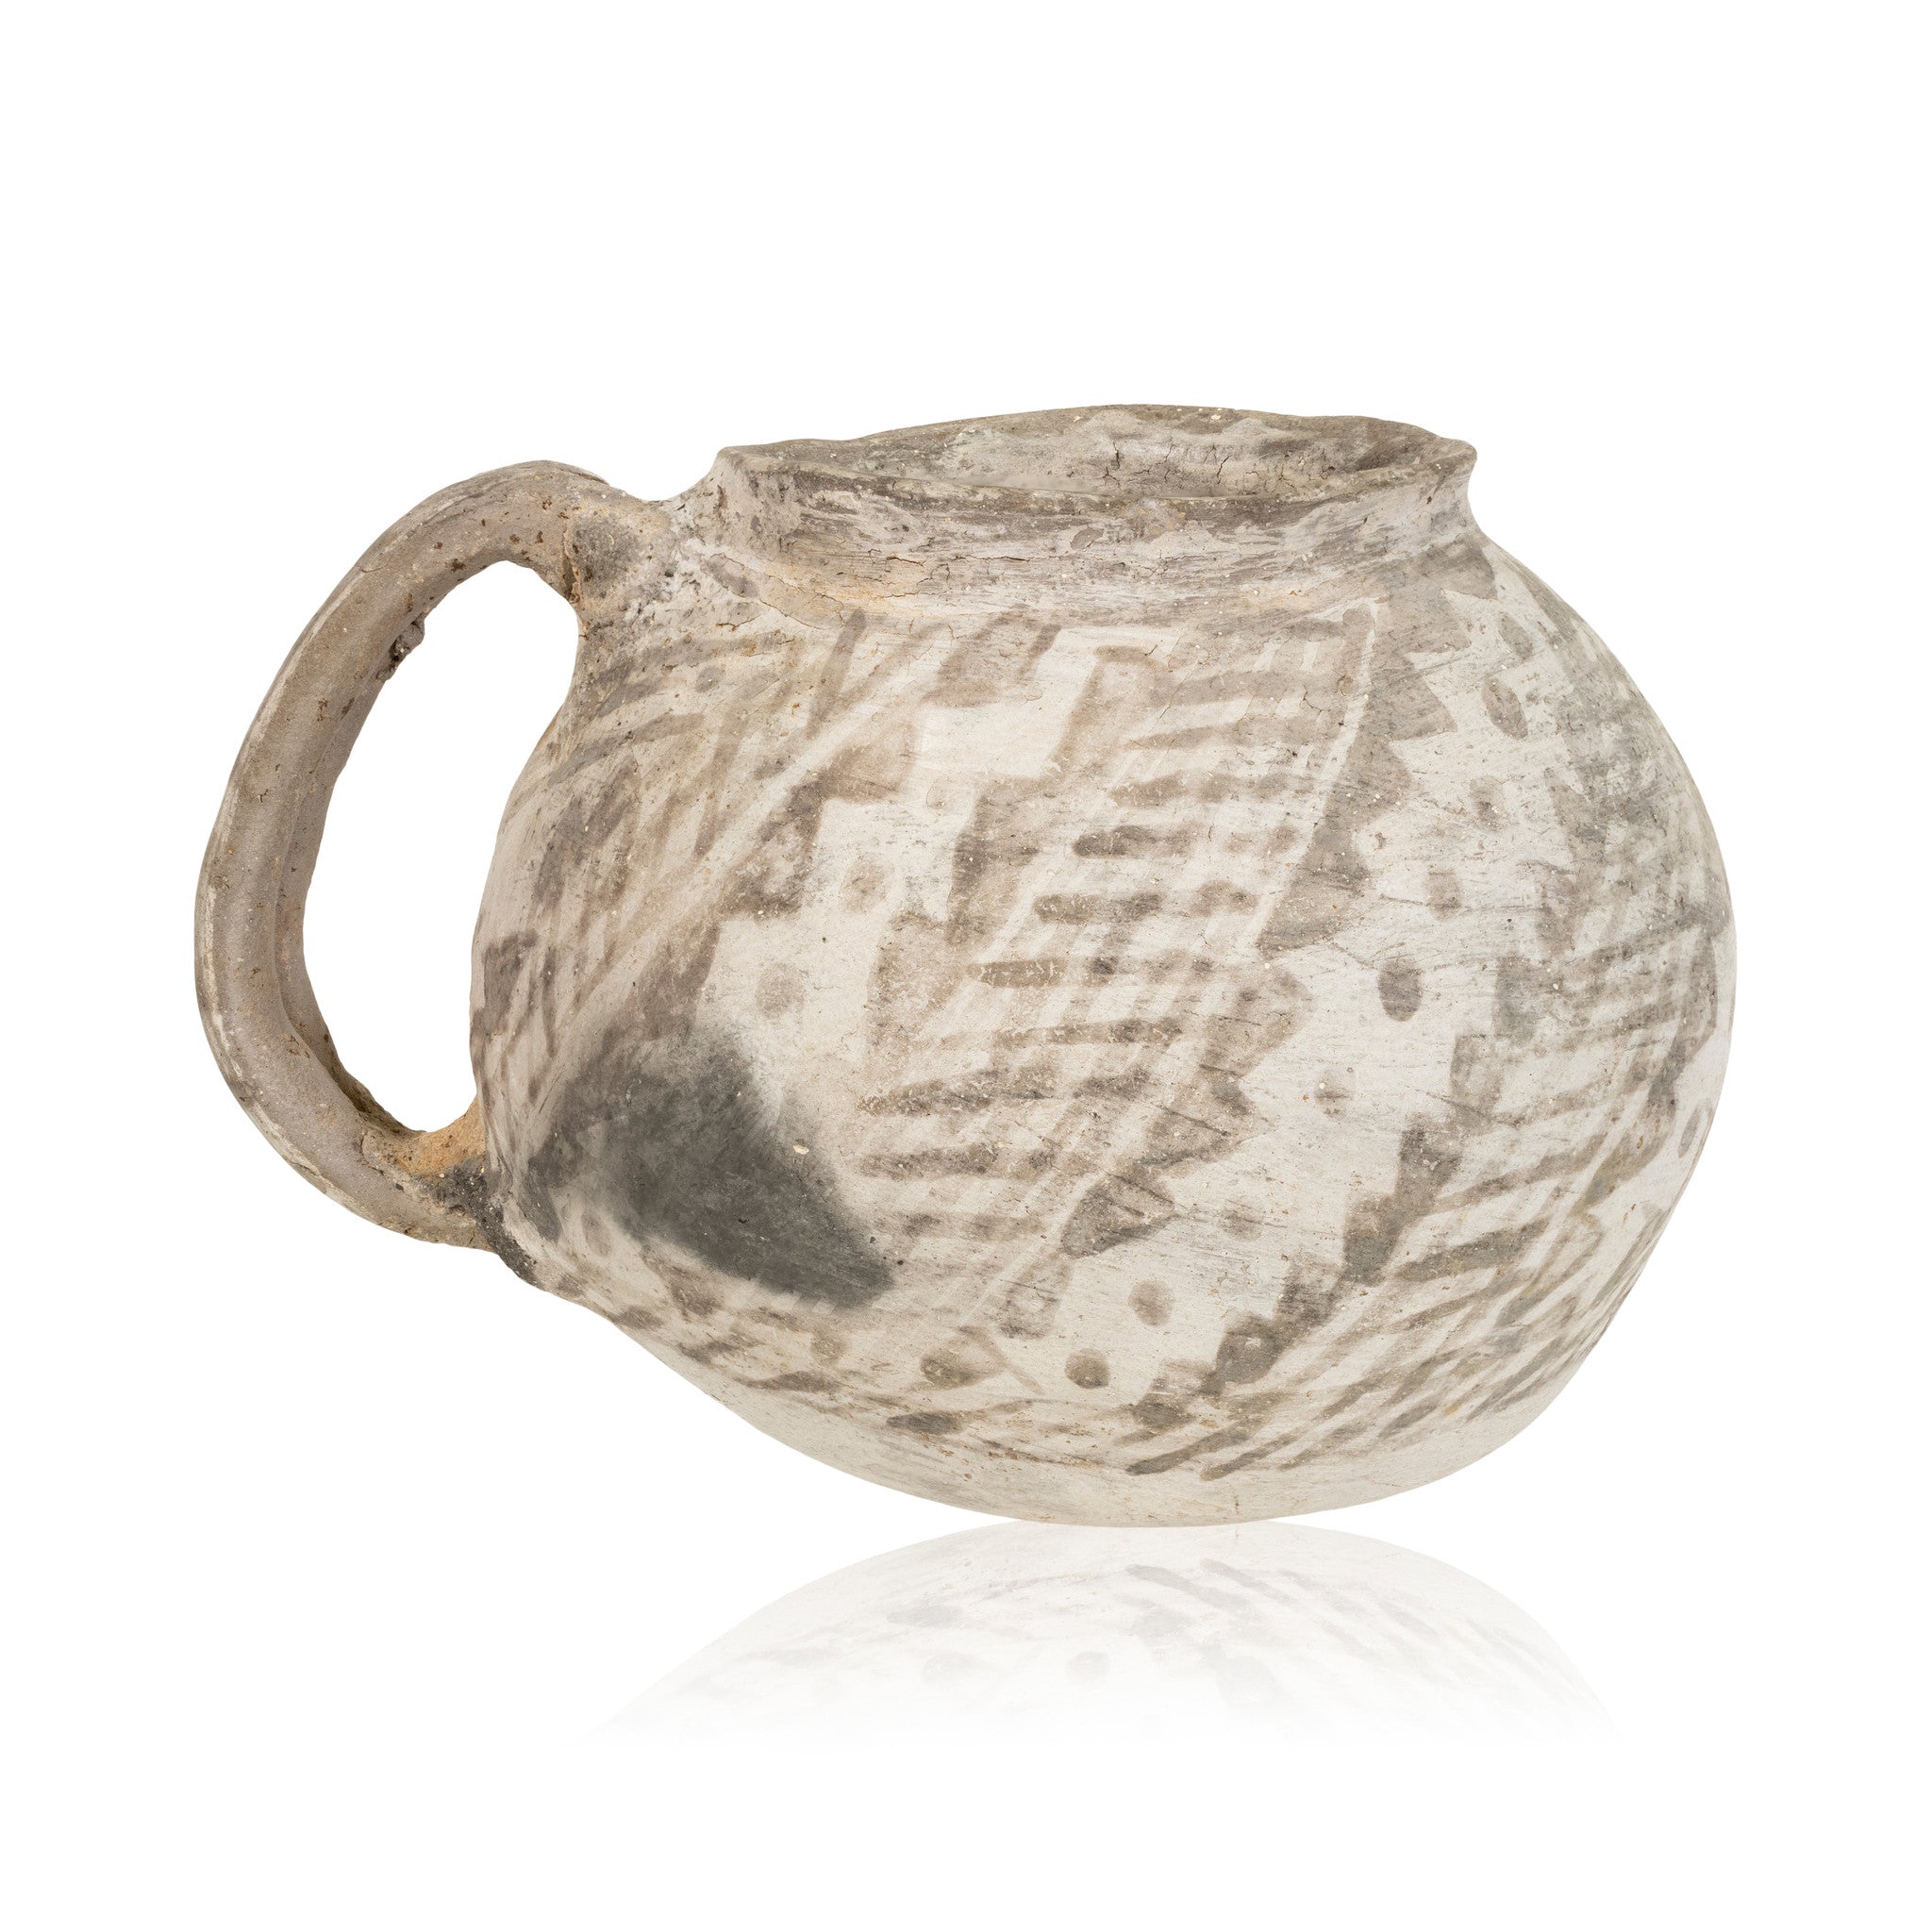 Chaco Pitcher, Native, Pottery, Prehistoric